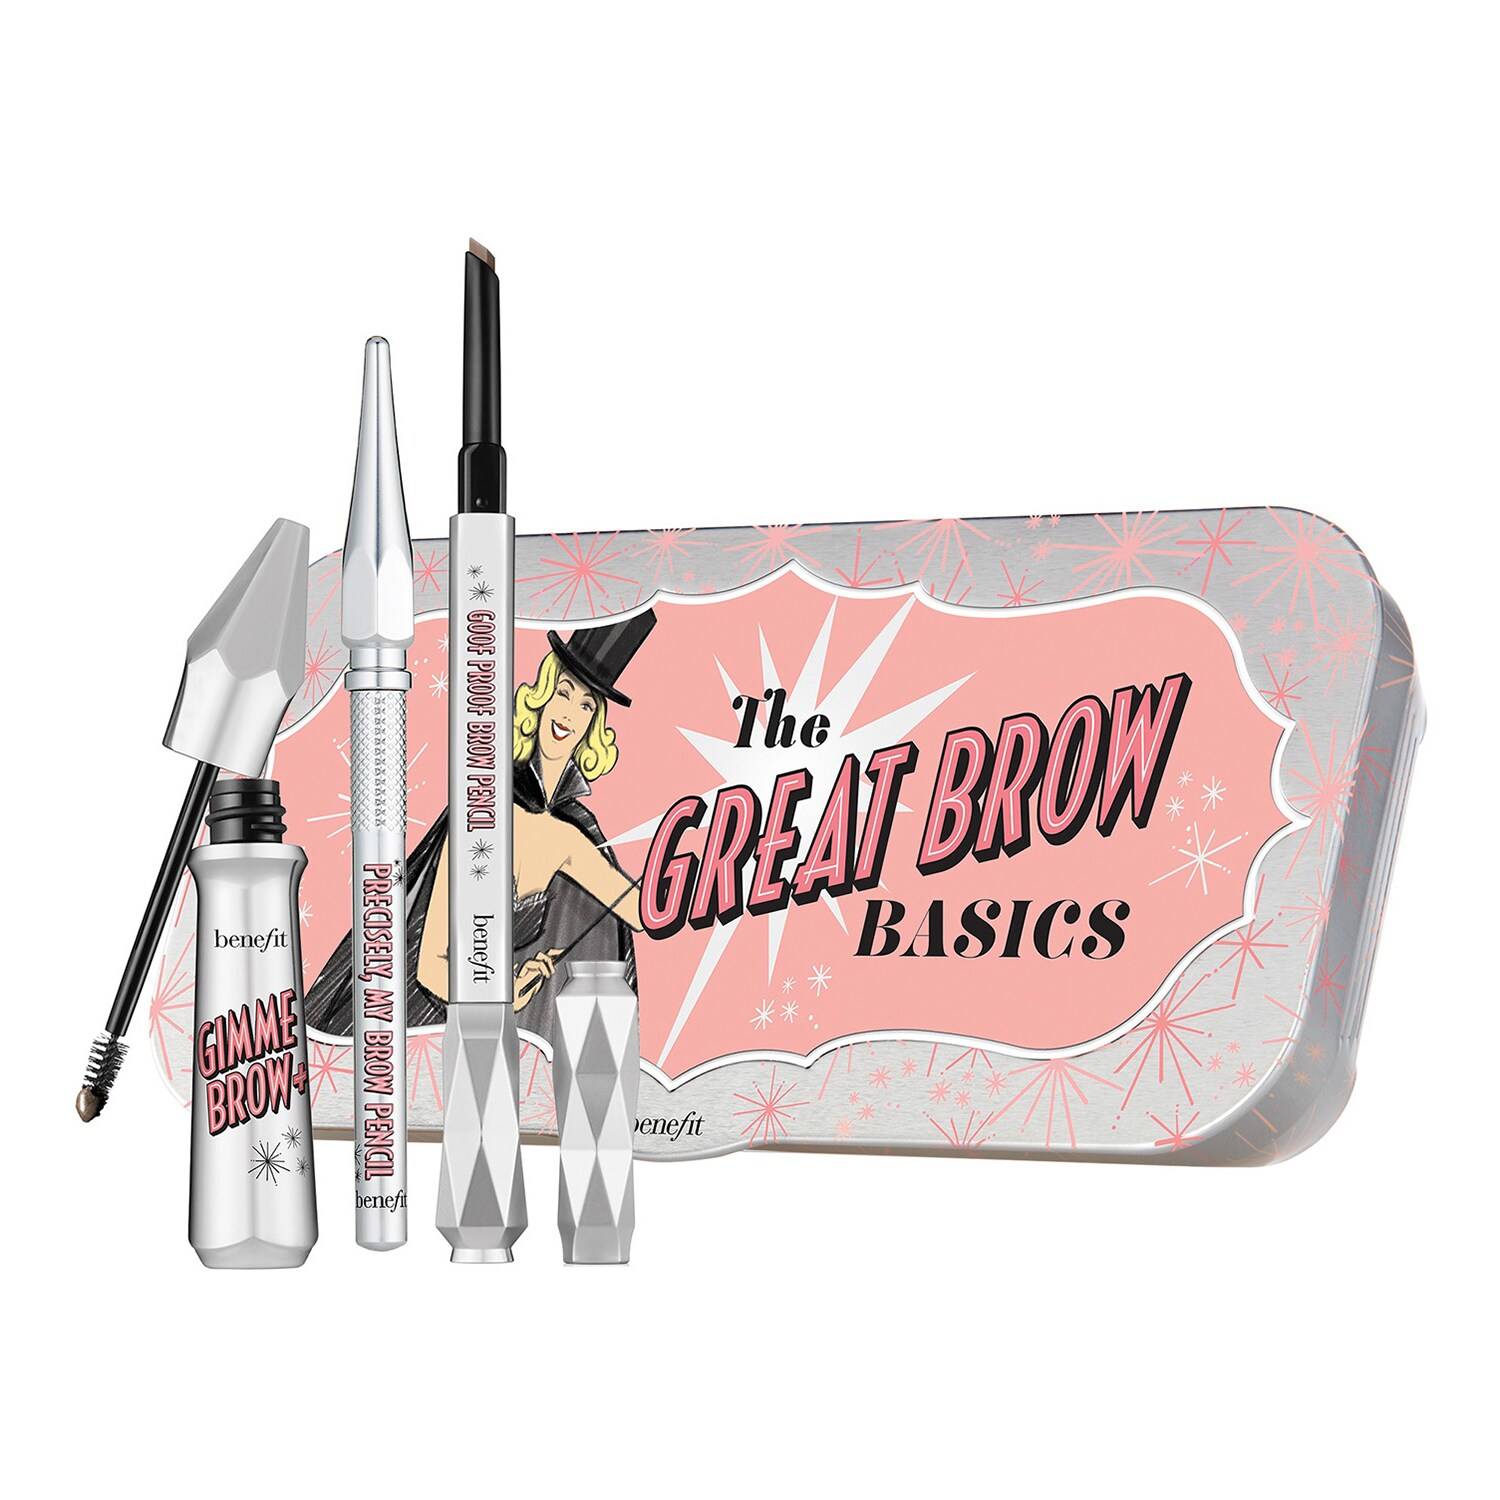 Benefit The Great Brow Basics Brow Gel & Pencils Collection 3.4G 4